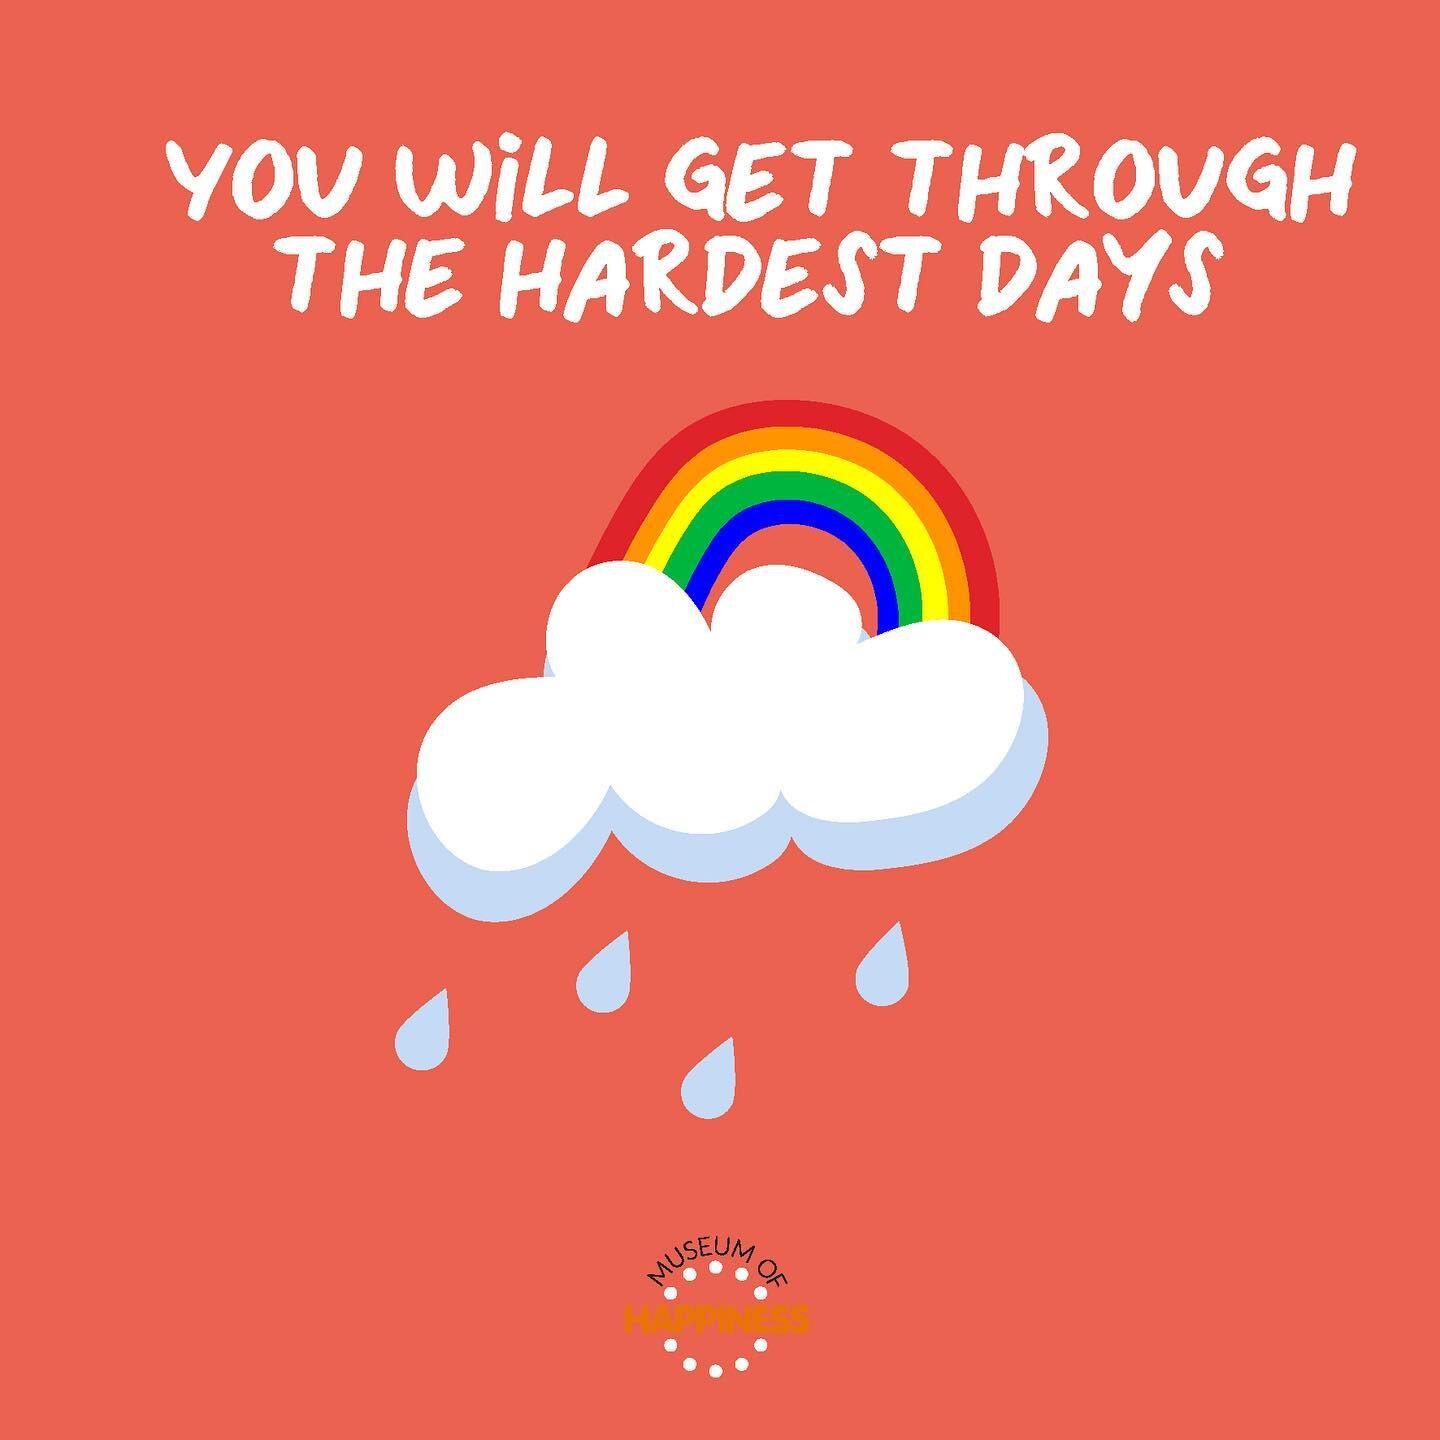 Being human can be hard and life can be hard. We want to remind you, that you have survived 100% of your hardest days so far, and you will get through any tough times that are to come 💫🌈